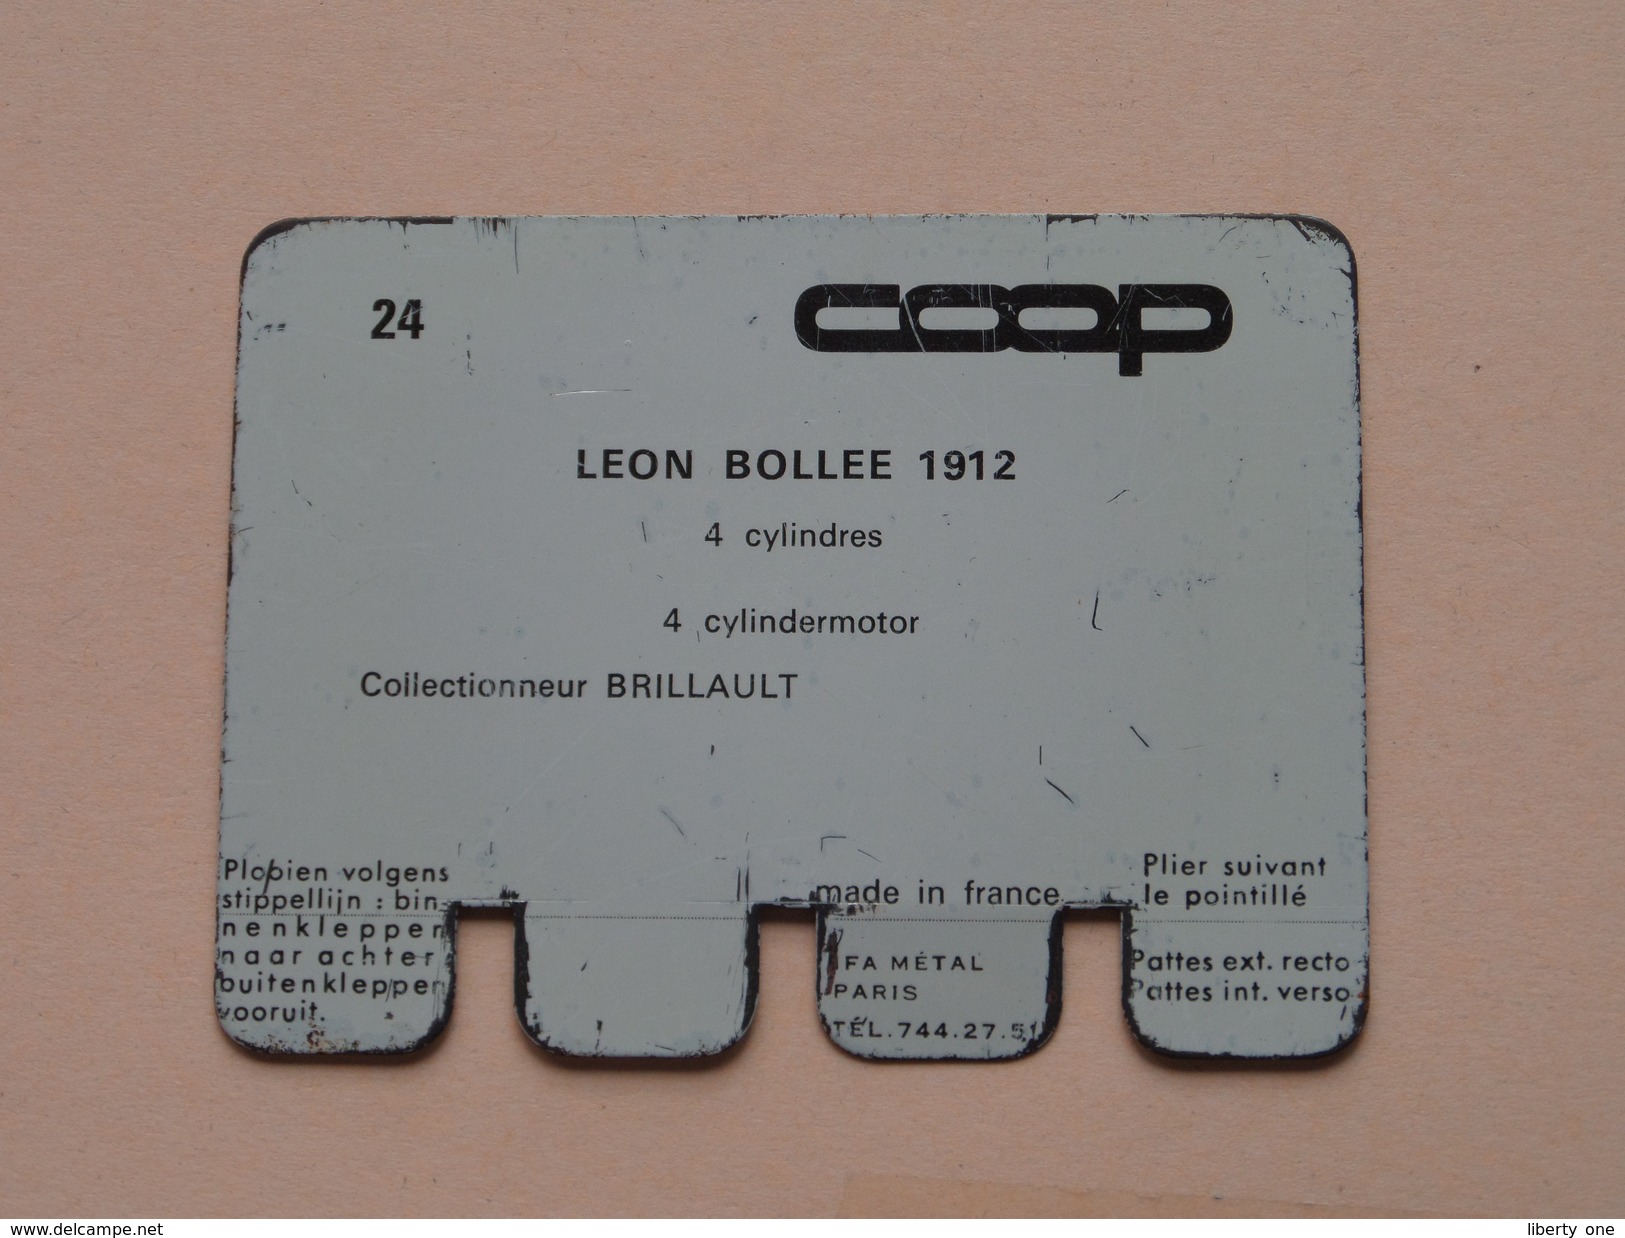 LEON BOLLEE 1912 - Coll. N° 24 NL/FR ( Plaquette C O O P - Voir Photo - IFA Metal Paris ) ! - Tin Signs (after1960)